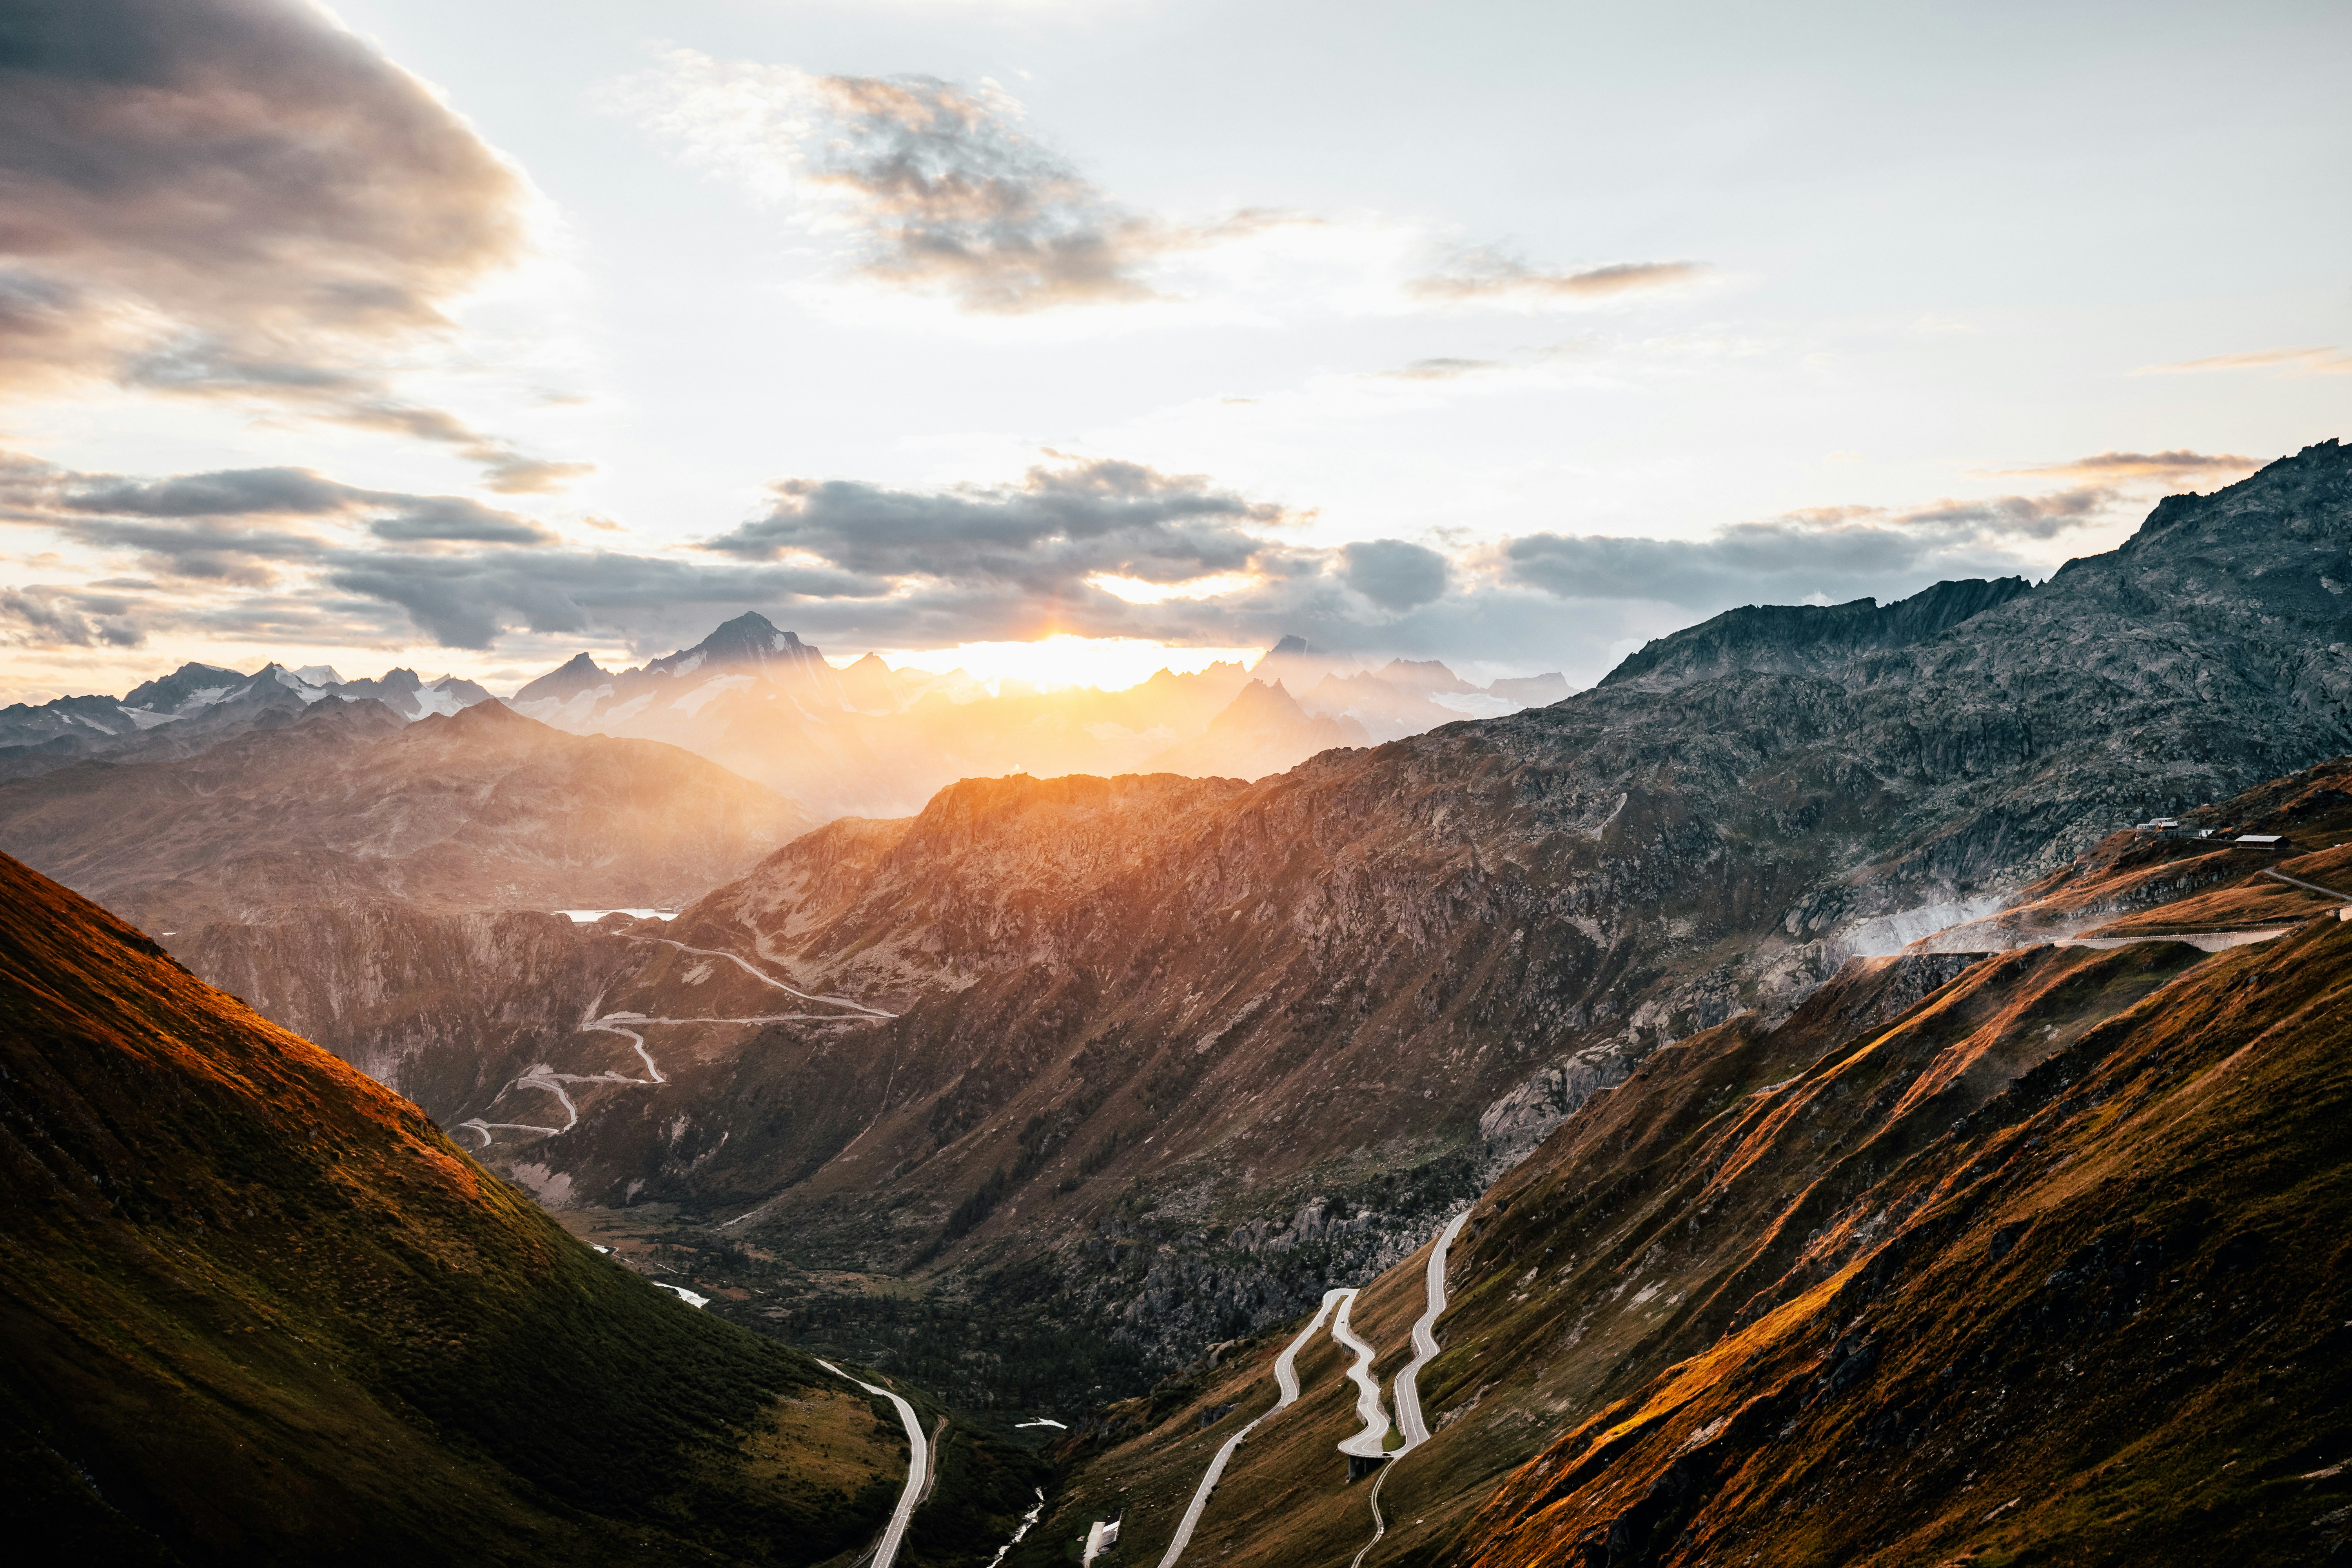 On top of the Furka mountain pass in switzerland you see beautiful sunsets almost every day.